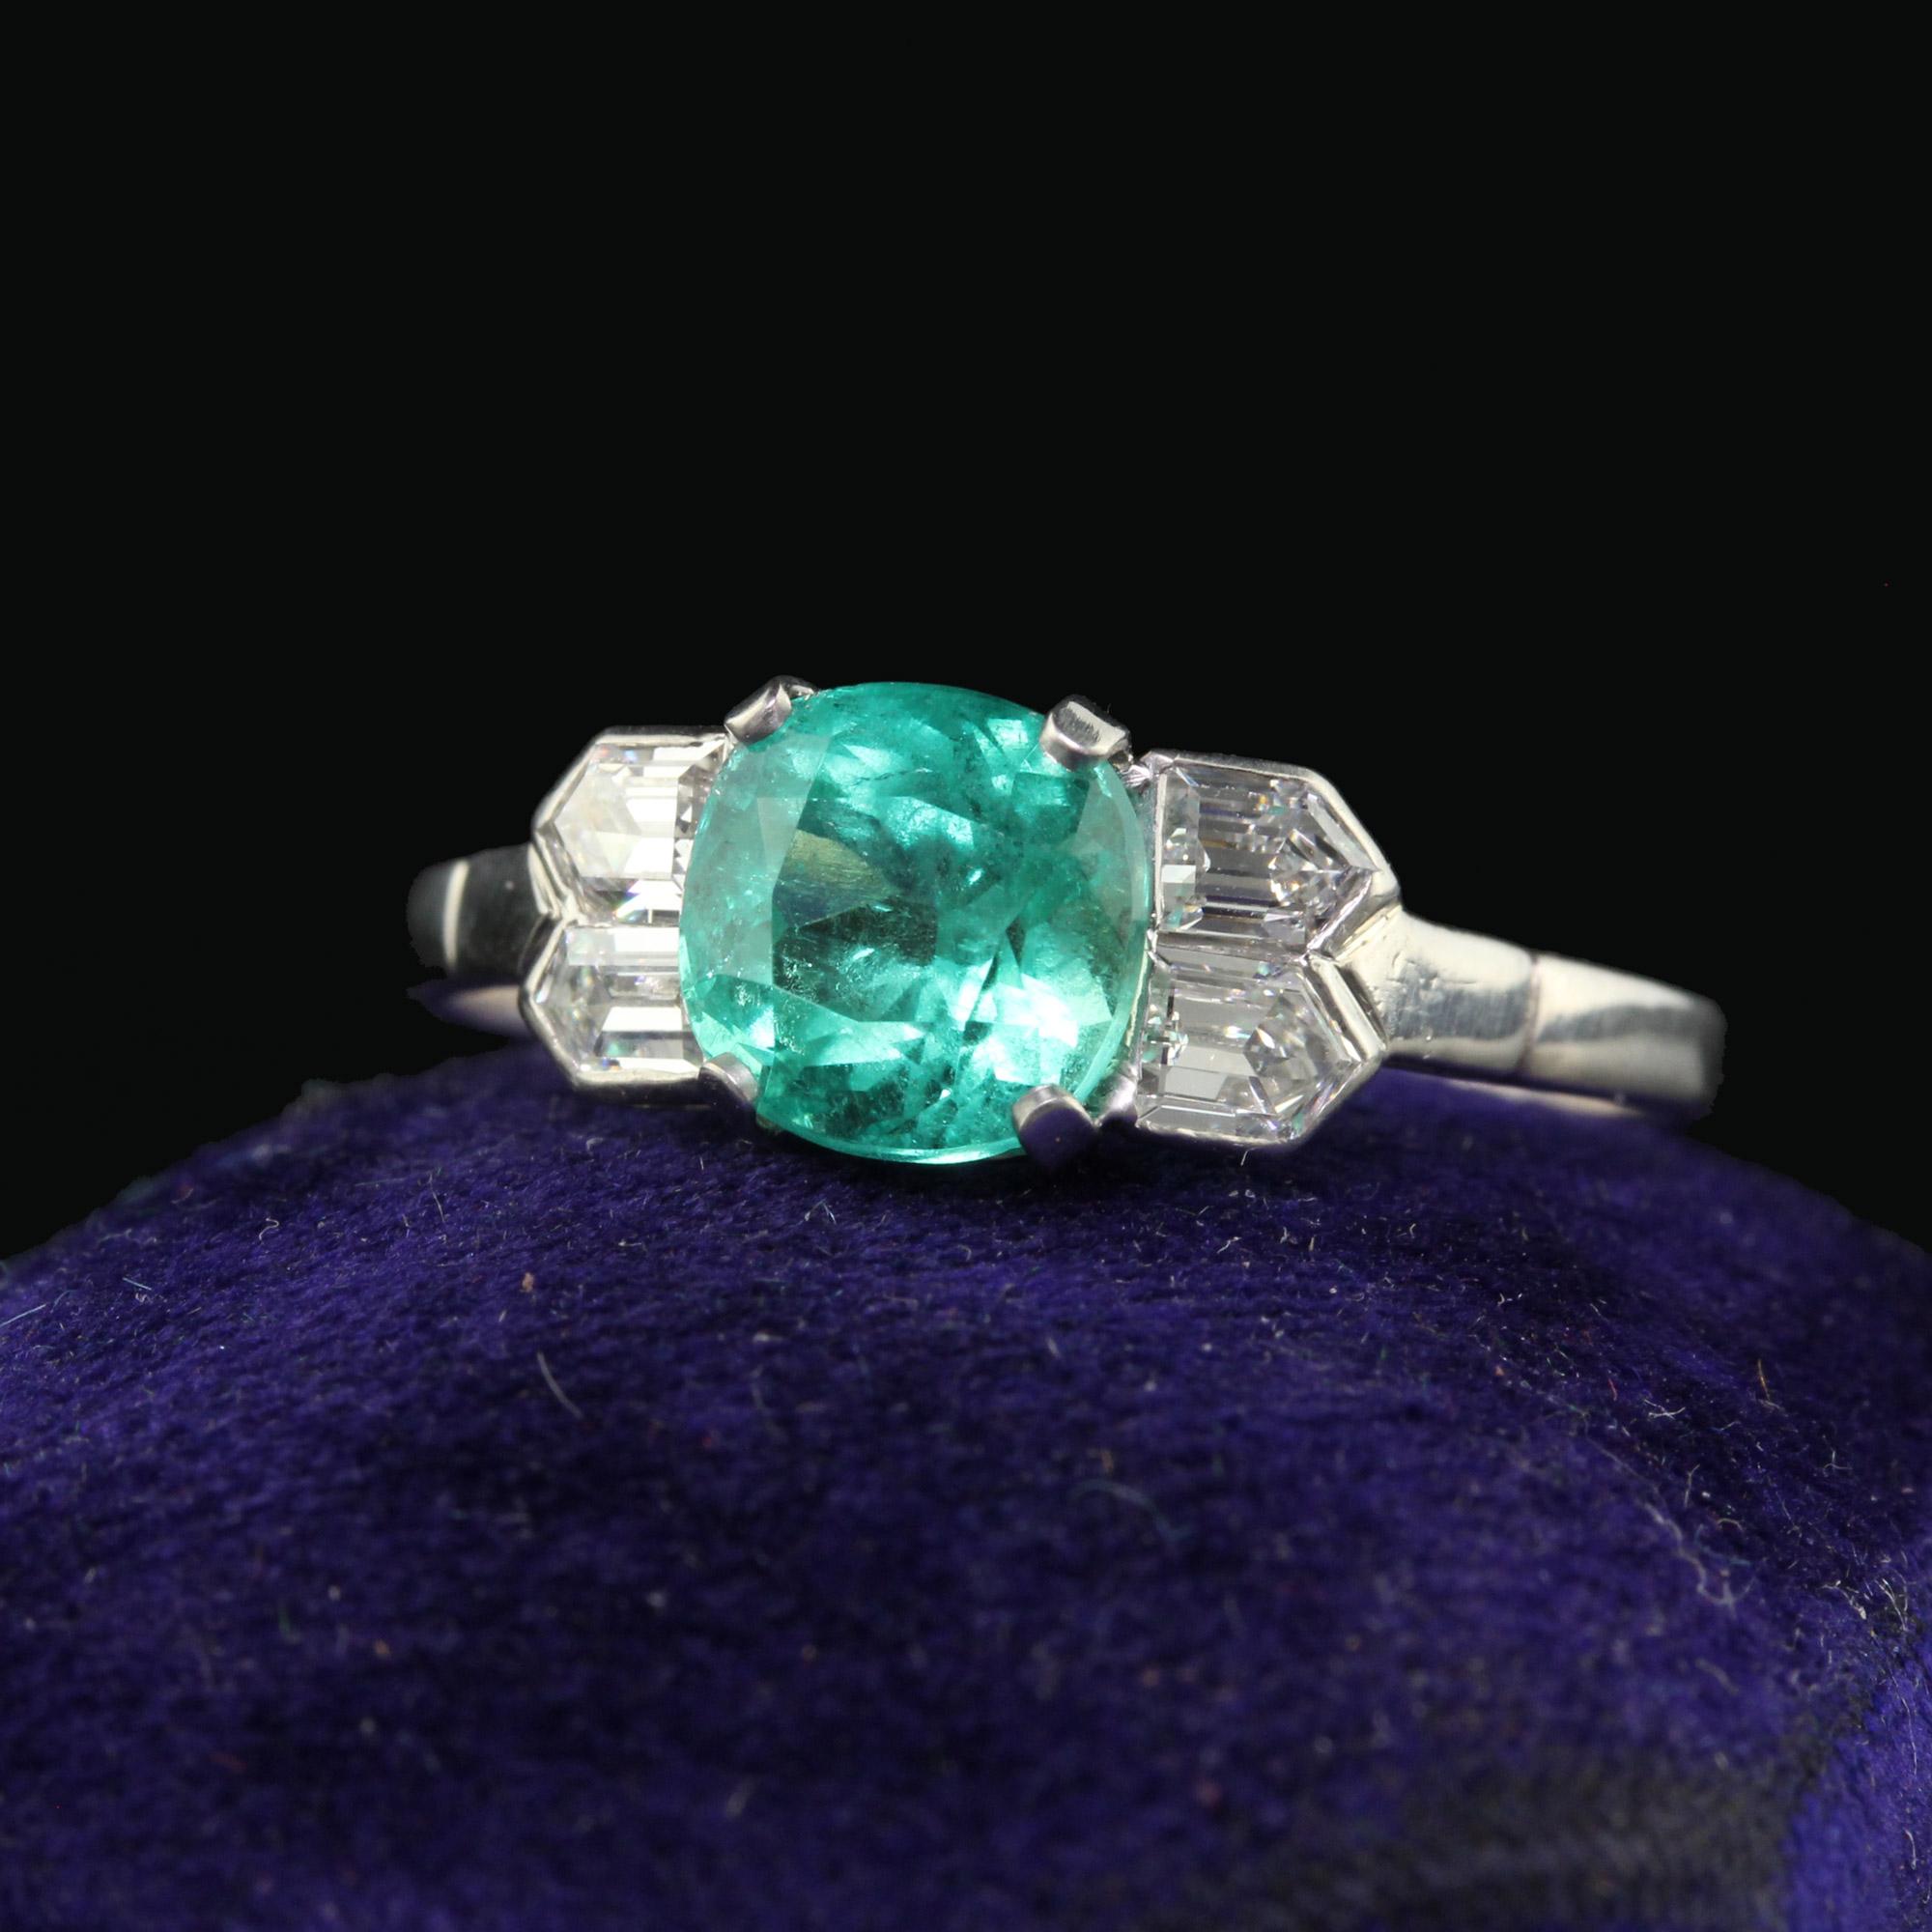 Beautiful Antique Art Deco Platinum Colombian Emerald and Diamond Engagement Ring. This incredible engagement ring is crafted in platinum. The center holds a gorgeous Colombian emerald and has bullet cut diamonds on either side. The ring sits low on